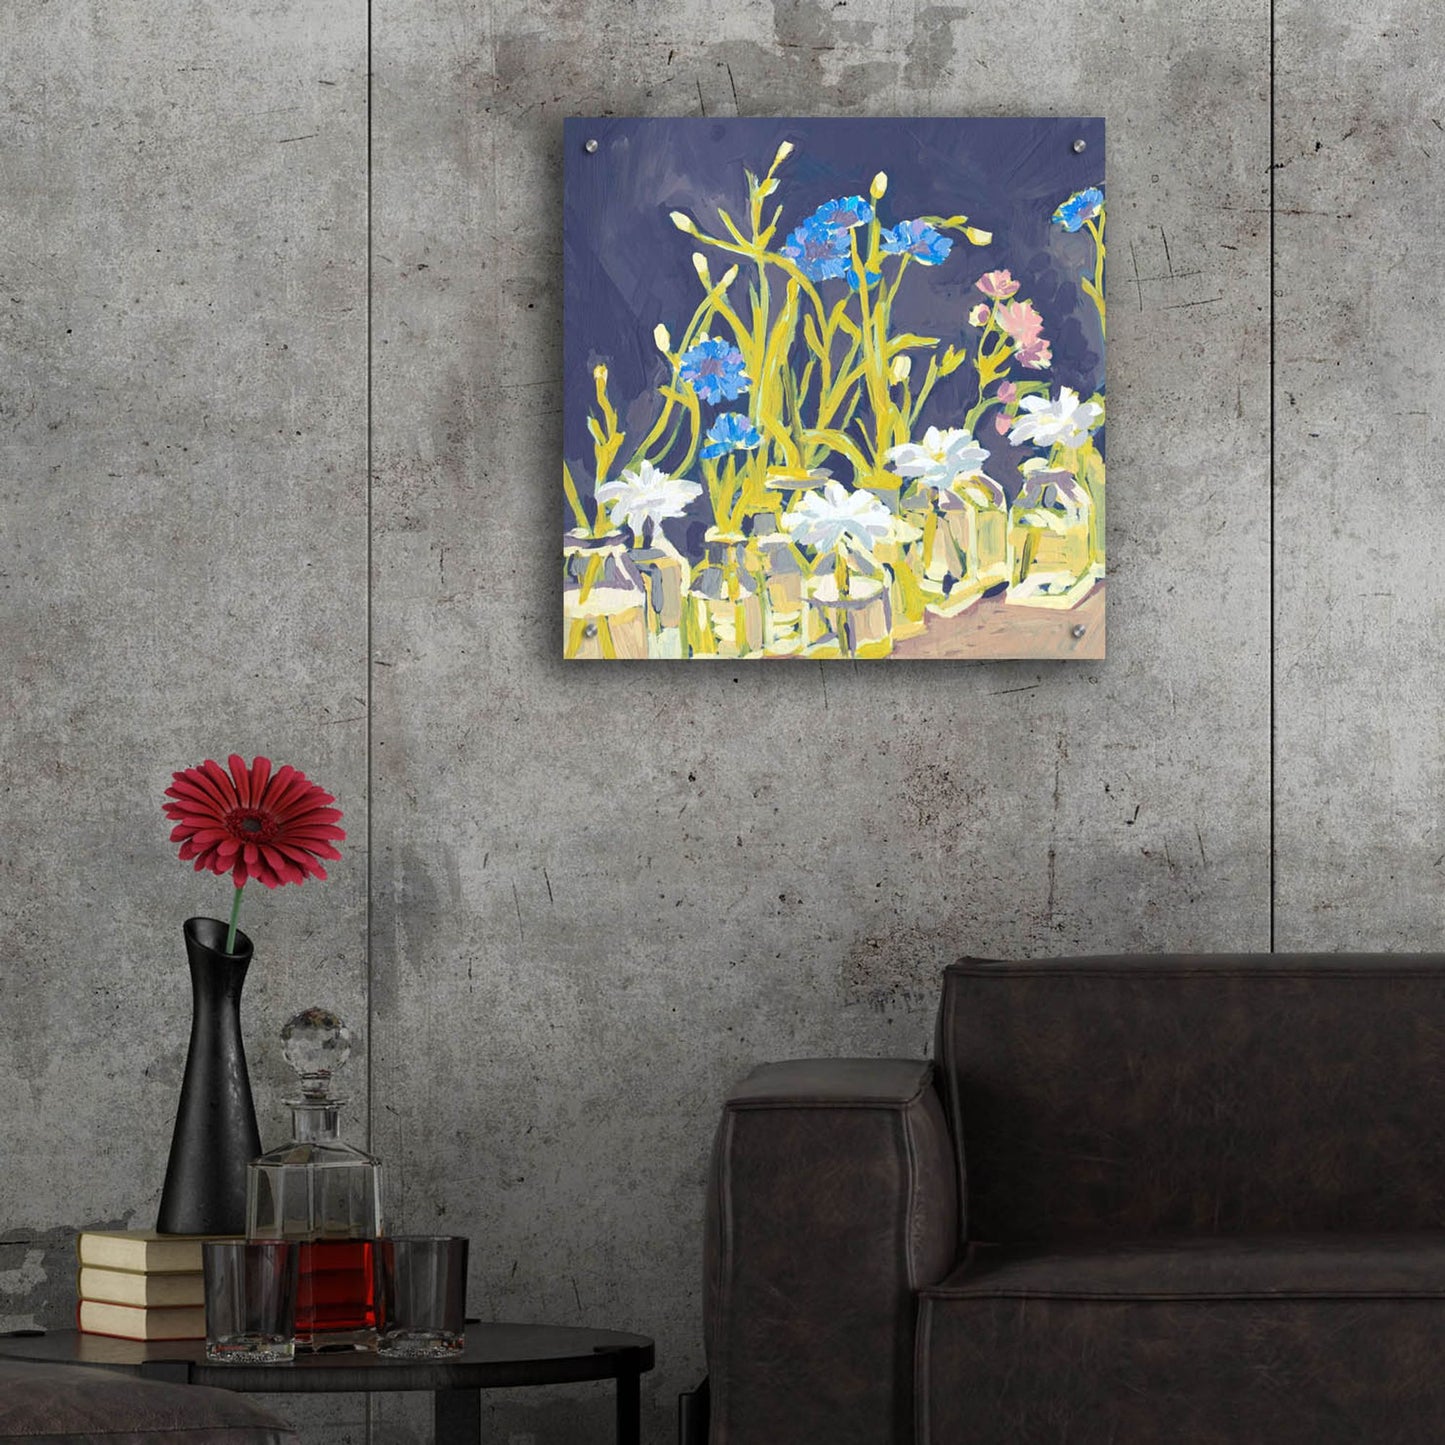 Epic Art 'Floral and Glass Menagerie' by Victoria Macmillan, Acrylic Glass Wall Art,24x24